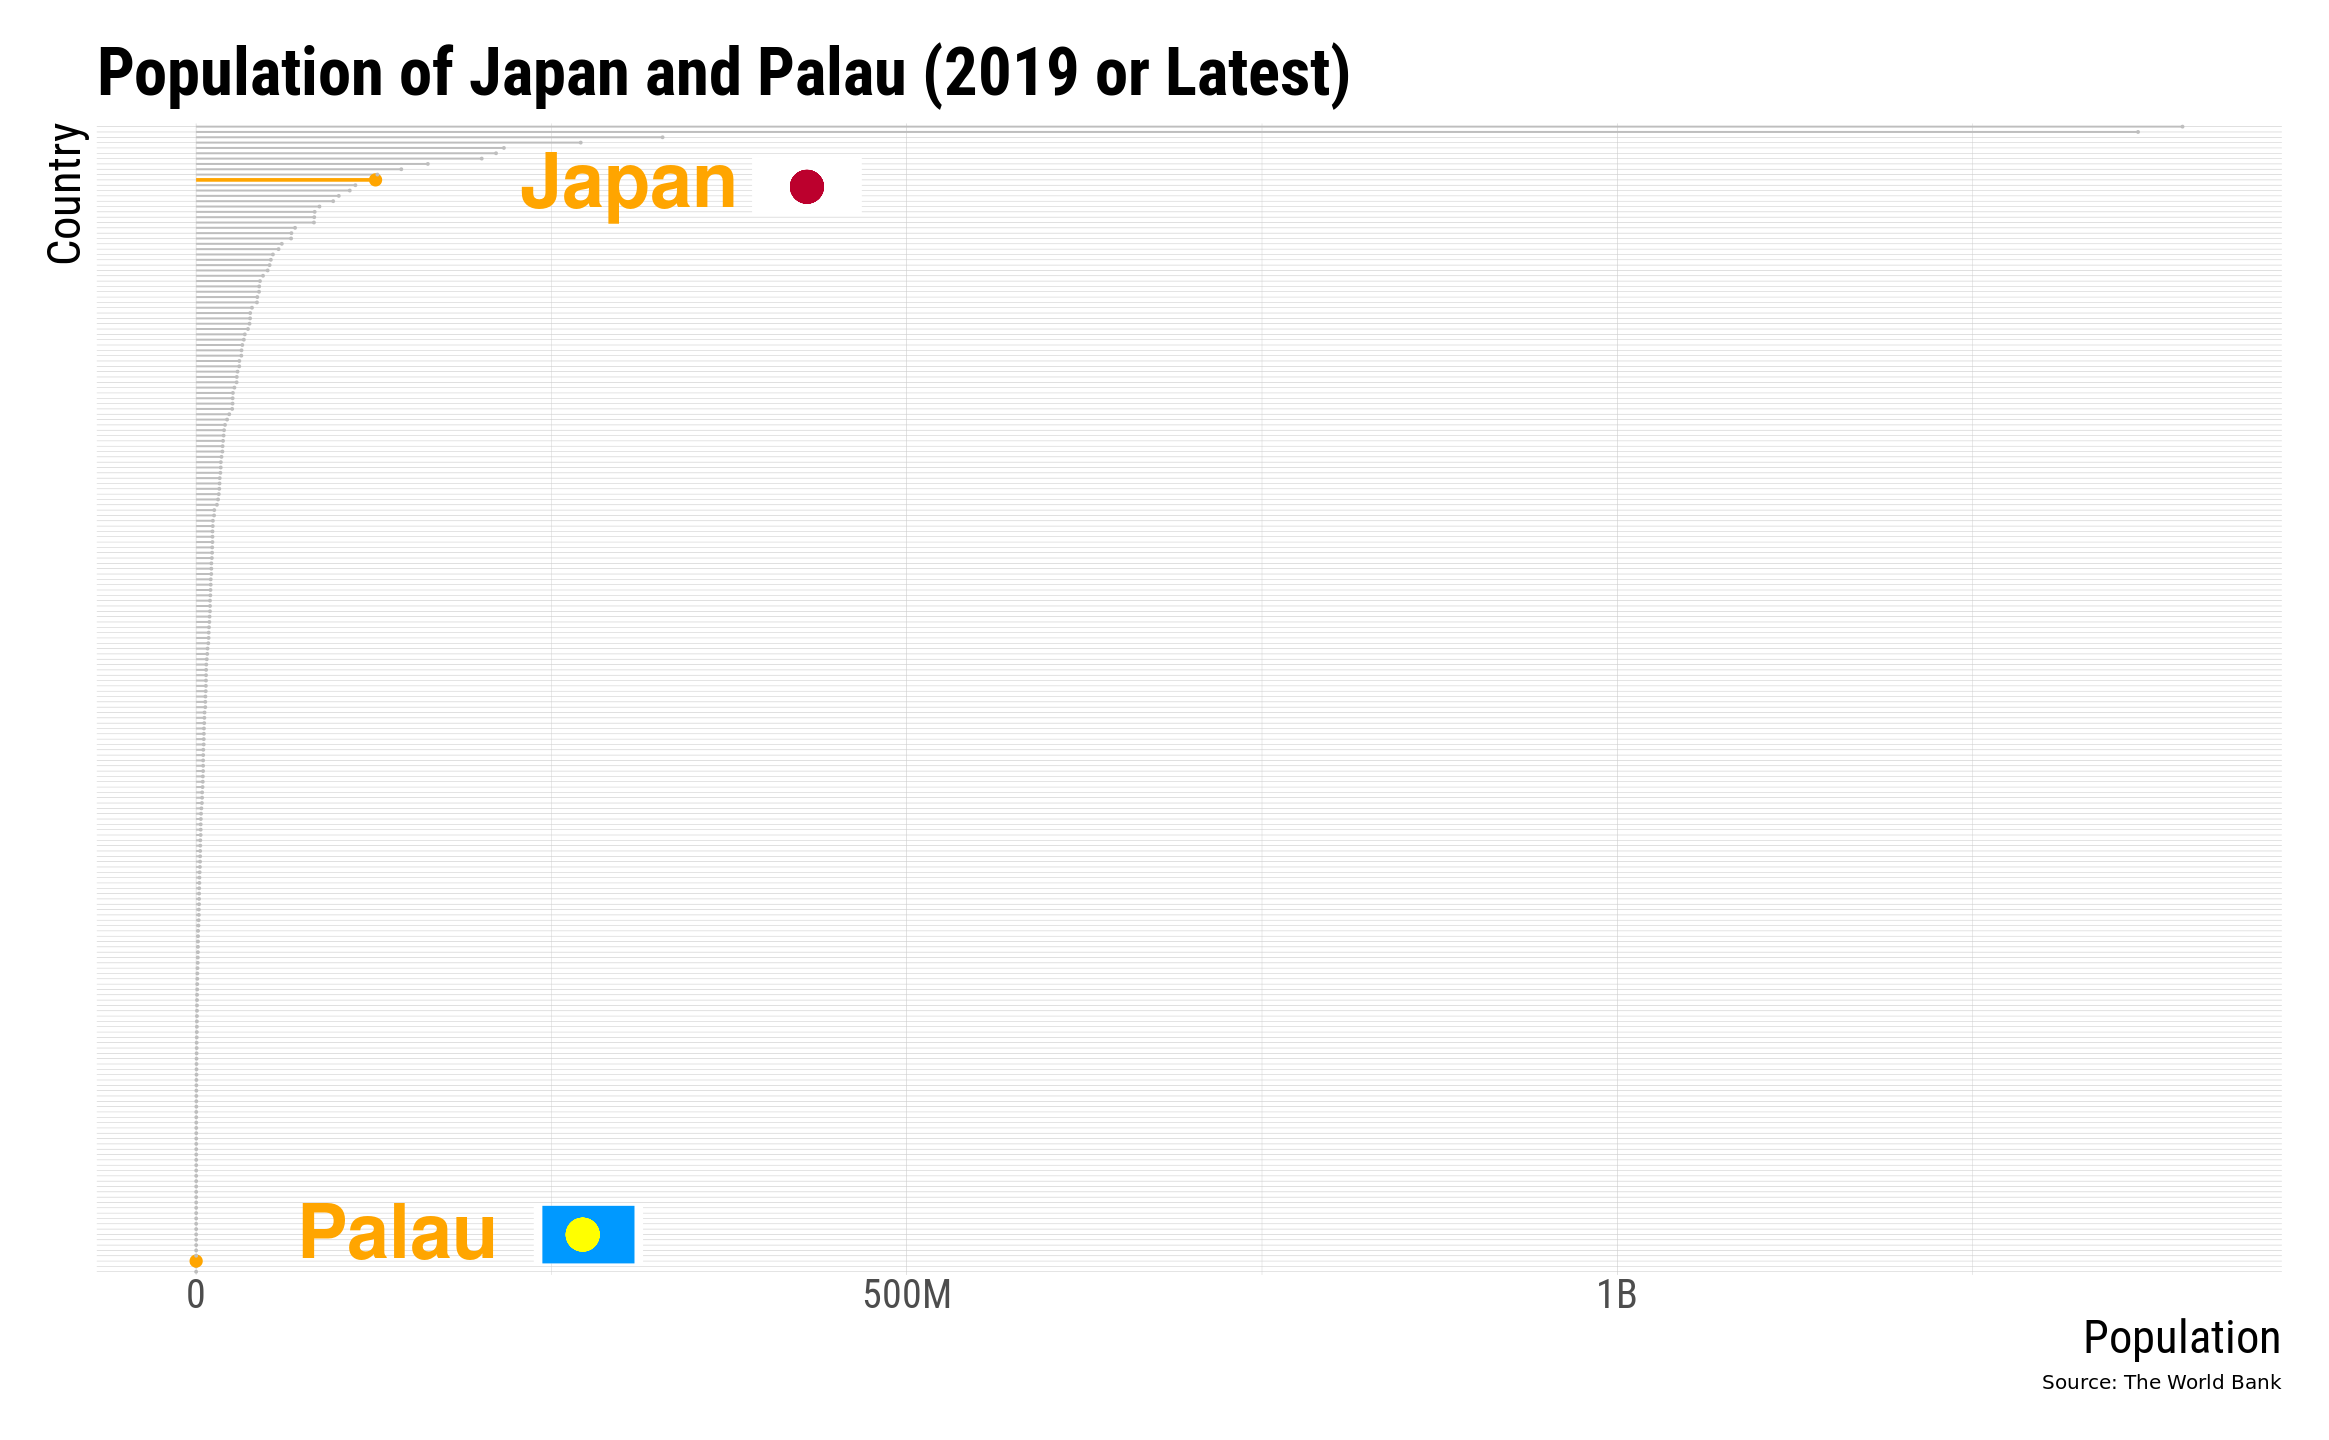 Population of countries with Japan and Palau labeled